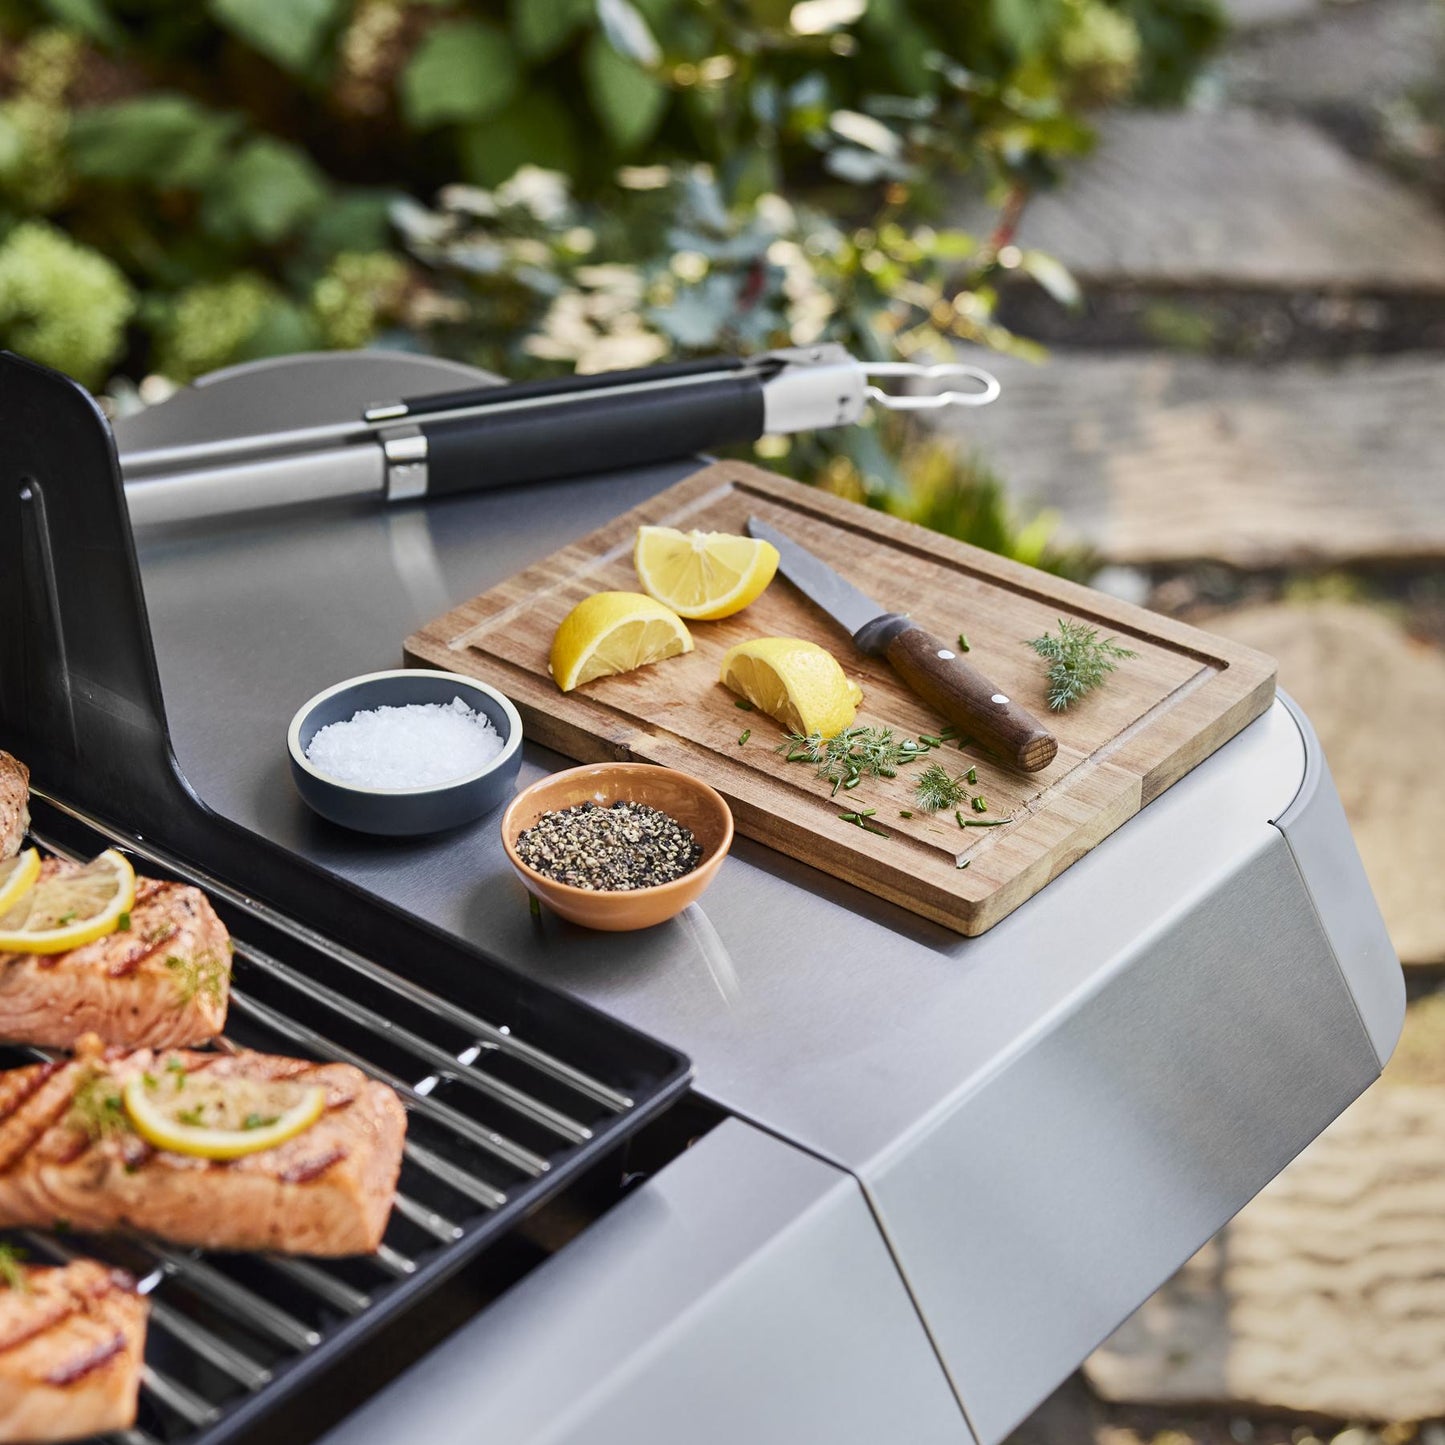 Weber 1500569 Genesis S-315 Gas Grill (Natural Gas) - Stainless Steel